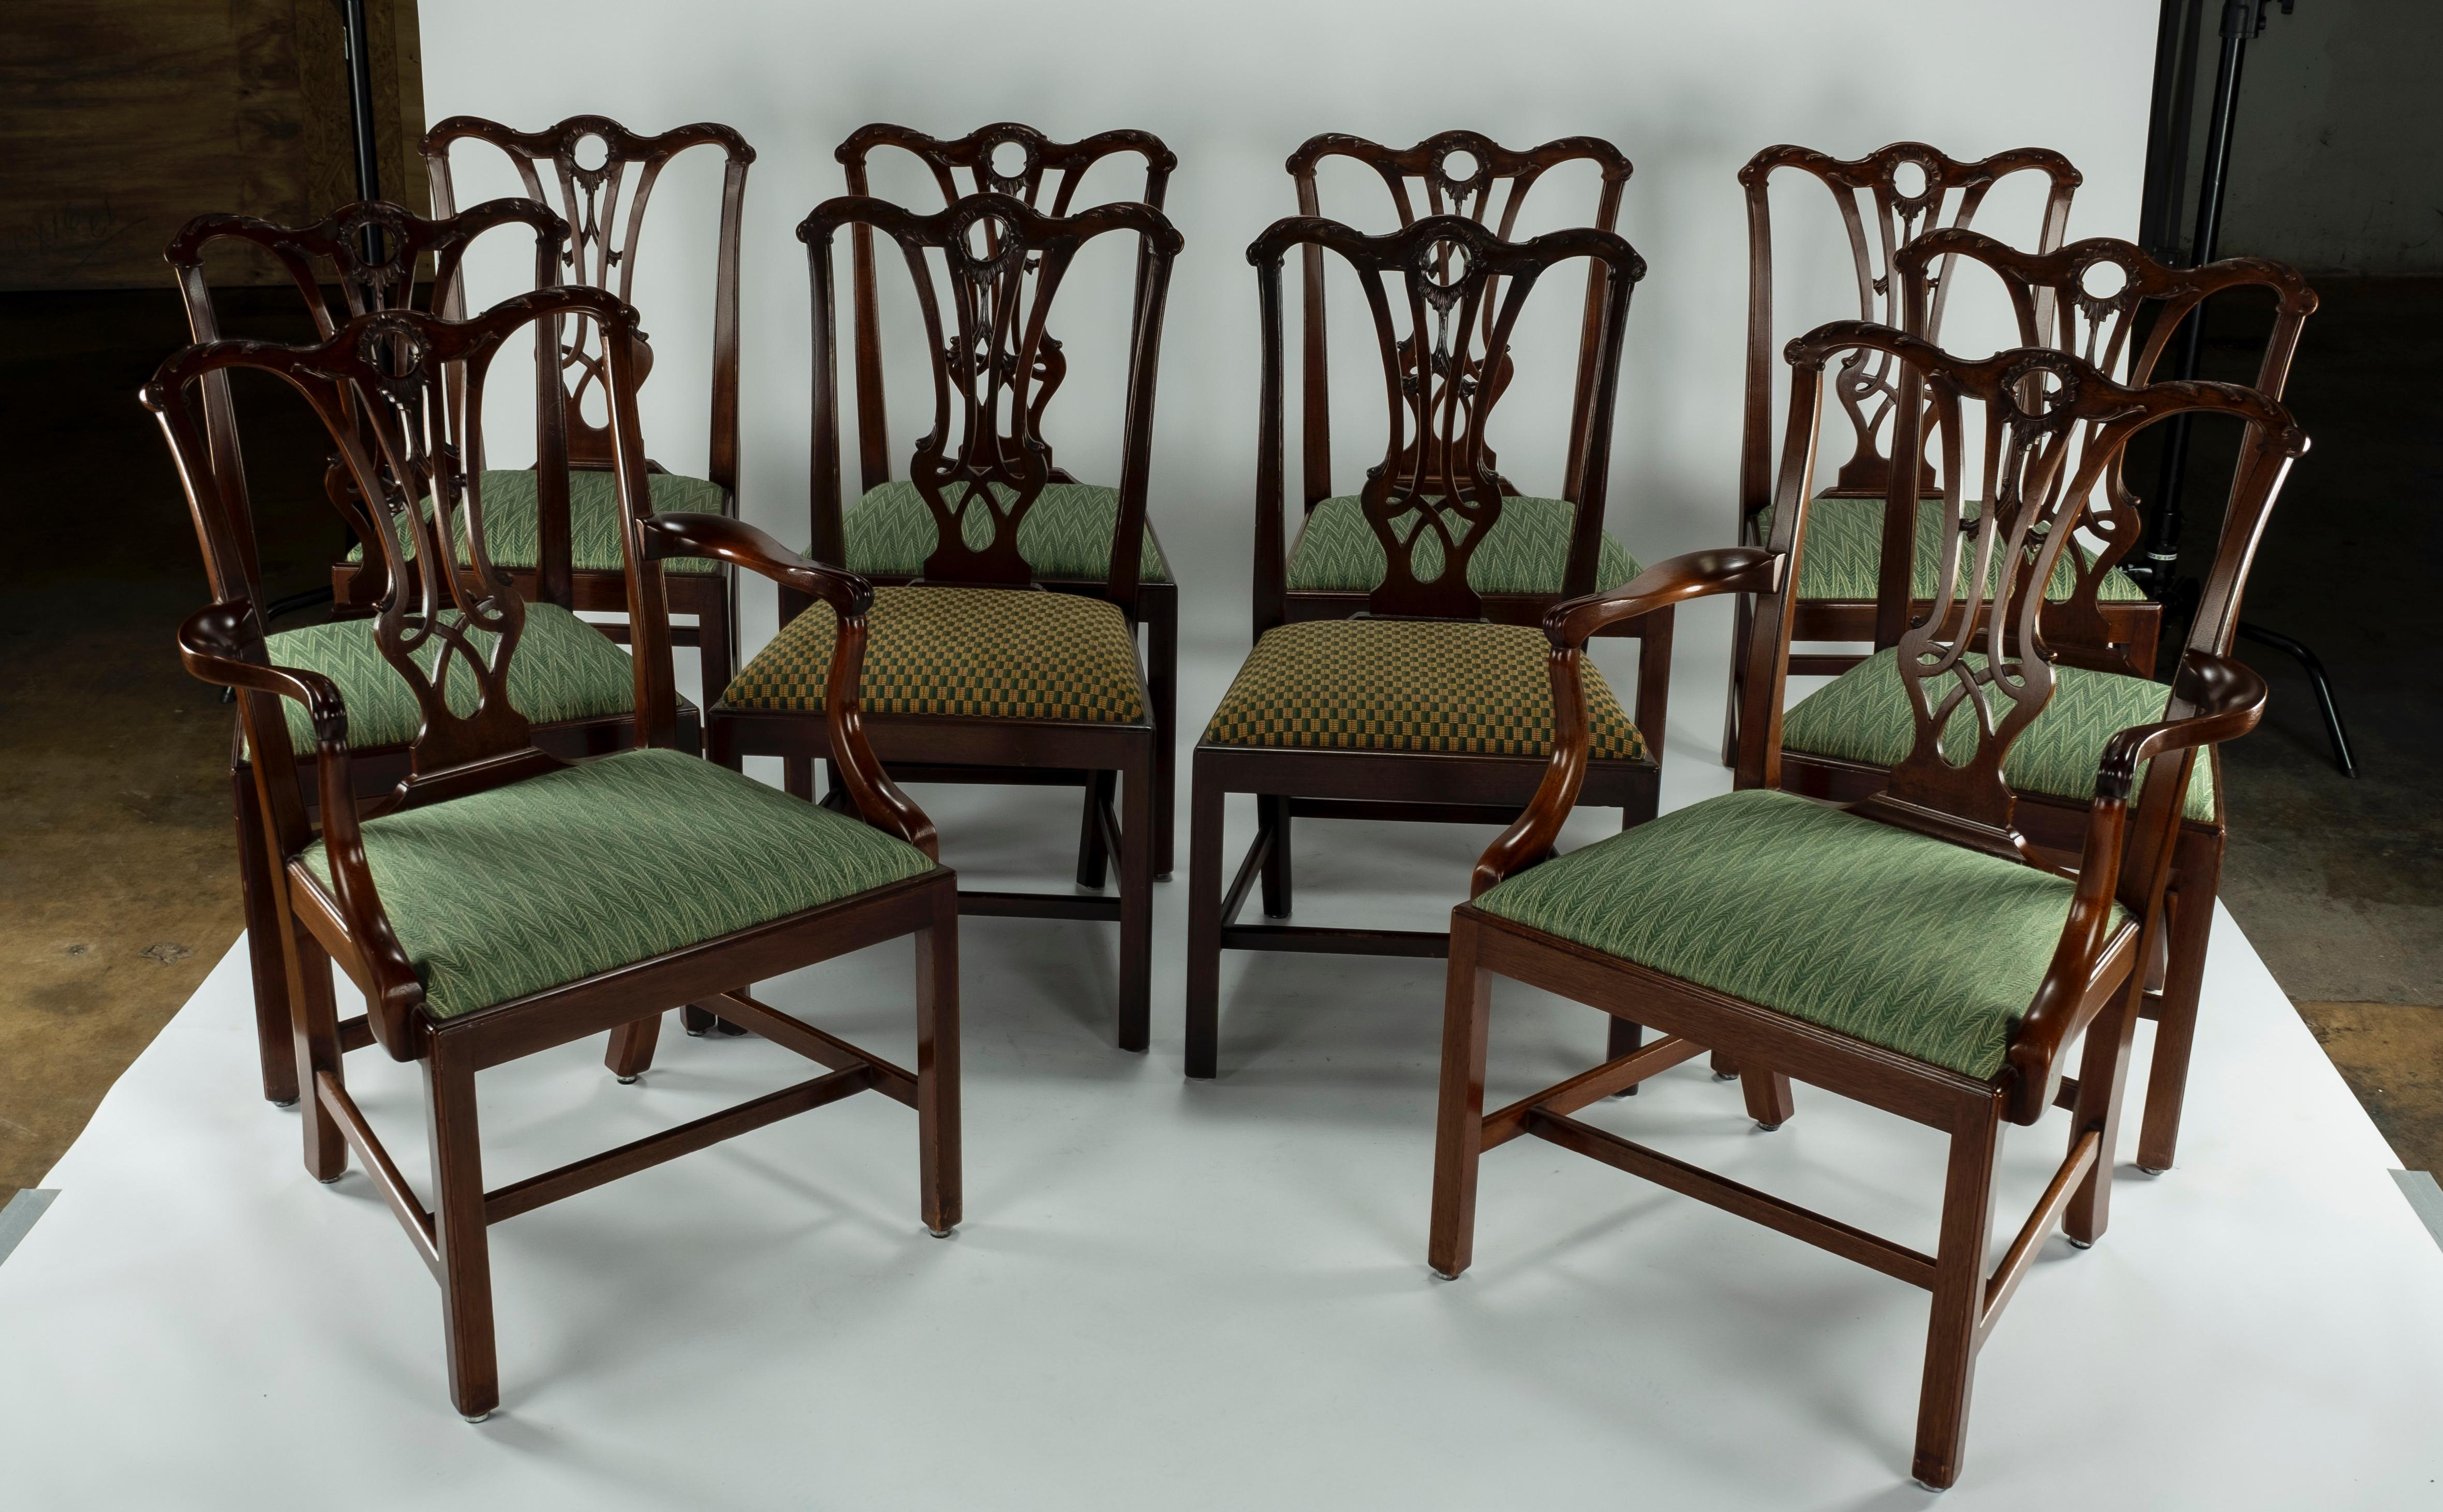 Set of ten mahogany dining chairs including two carvers and 8 side chairs. Serpentine crest rail has a pierced splat above a slip seat, straight square legs with molded corners joined by stretchers. Two of the side chairs were copied in the 1980s to